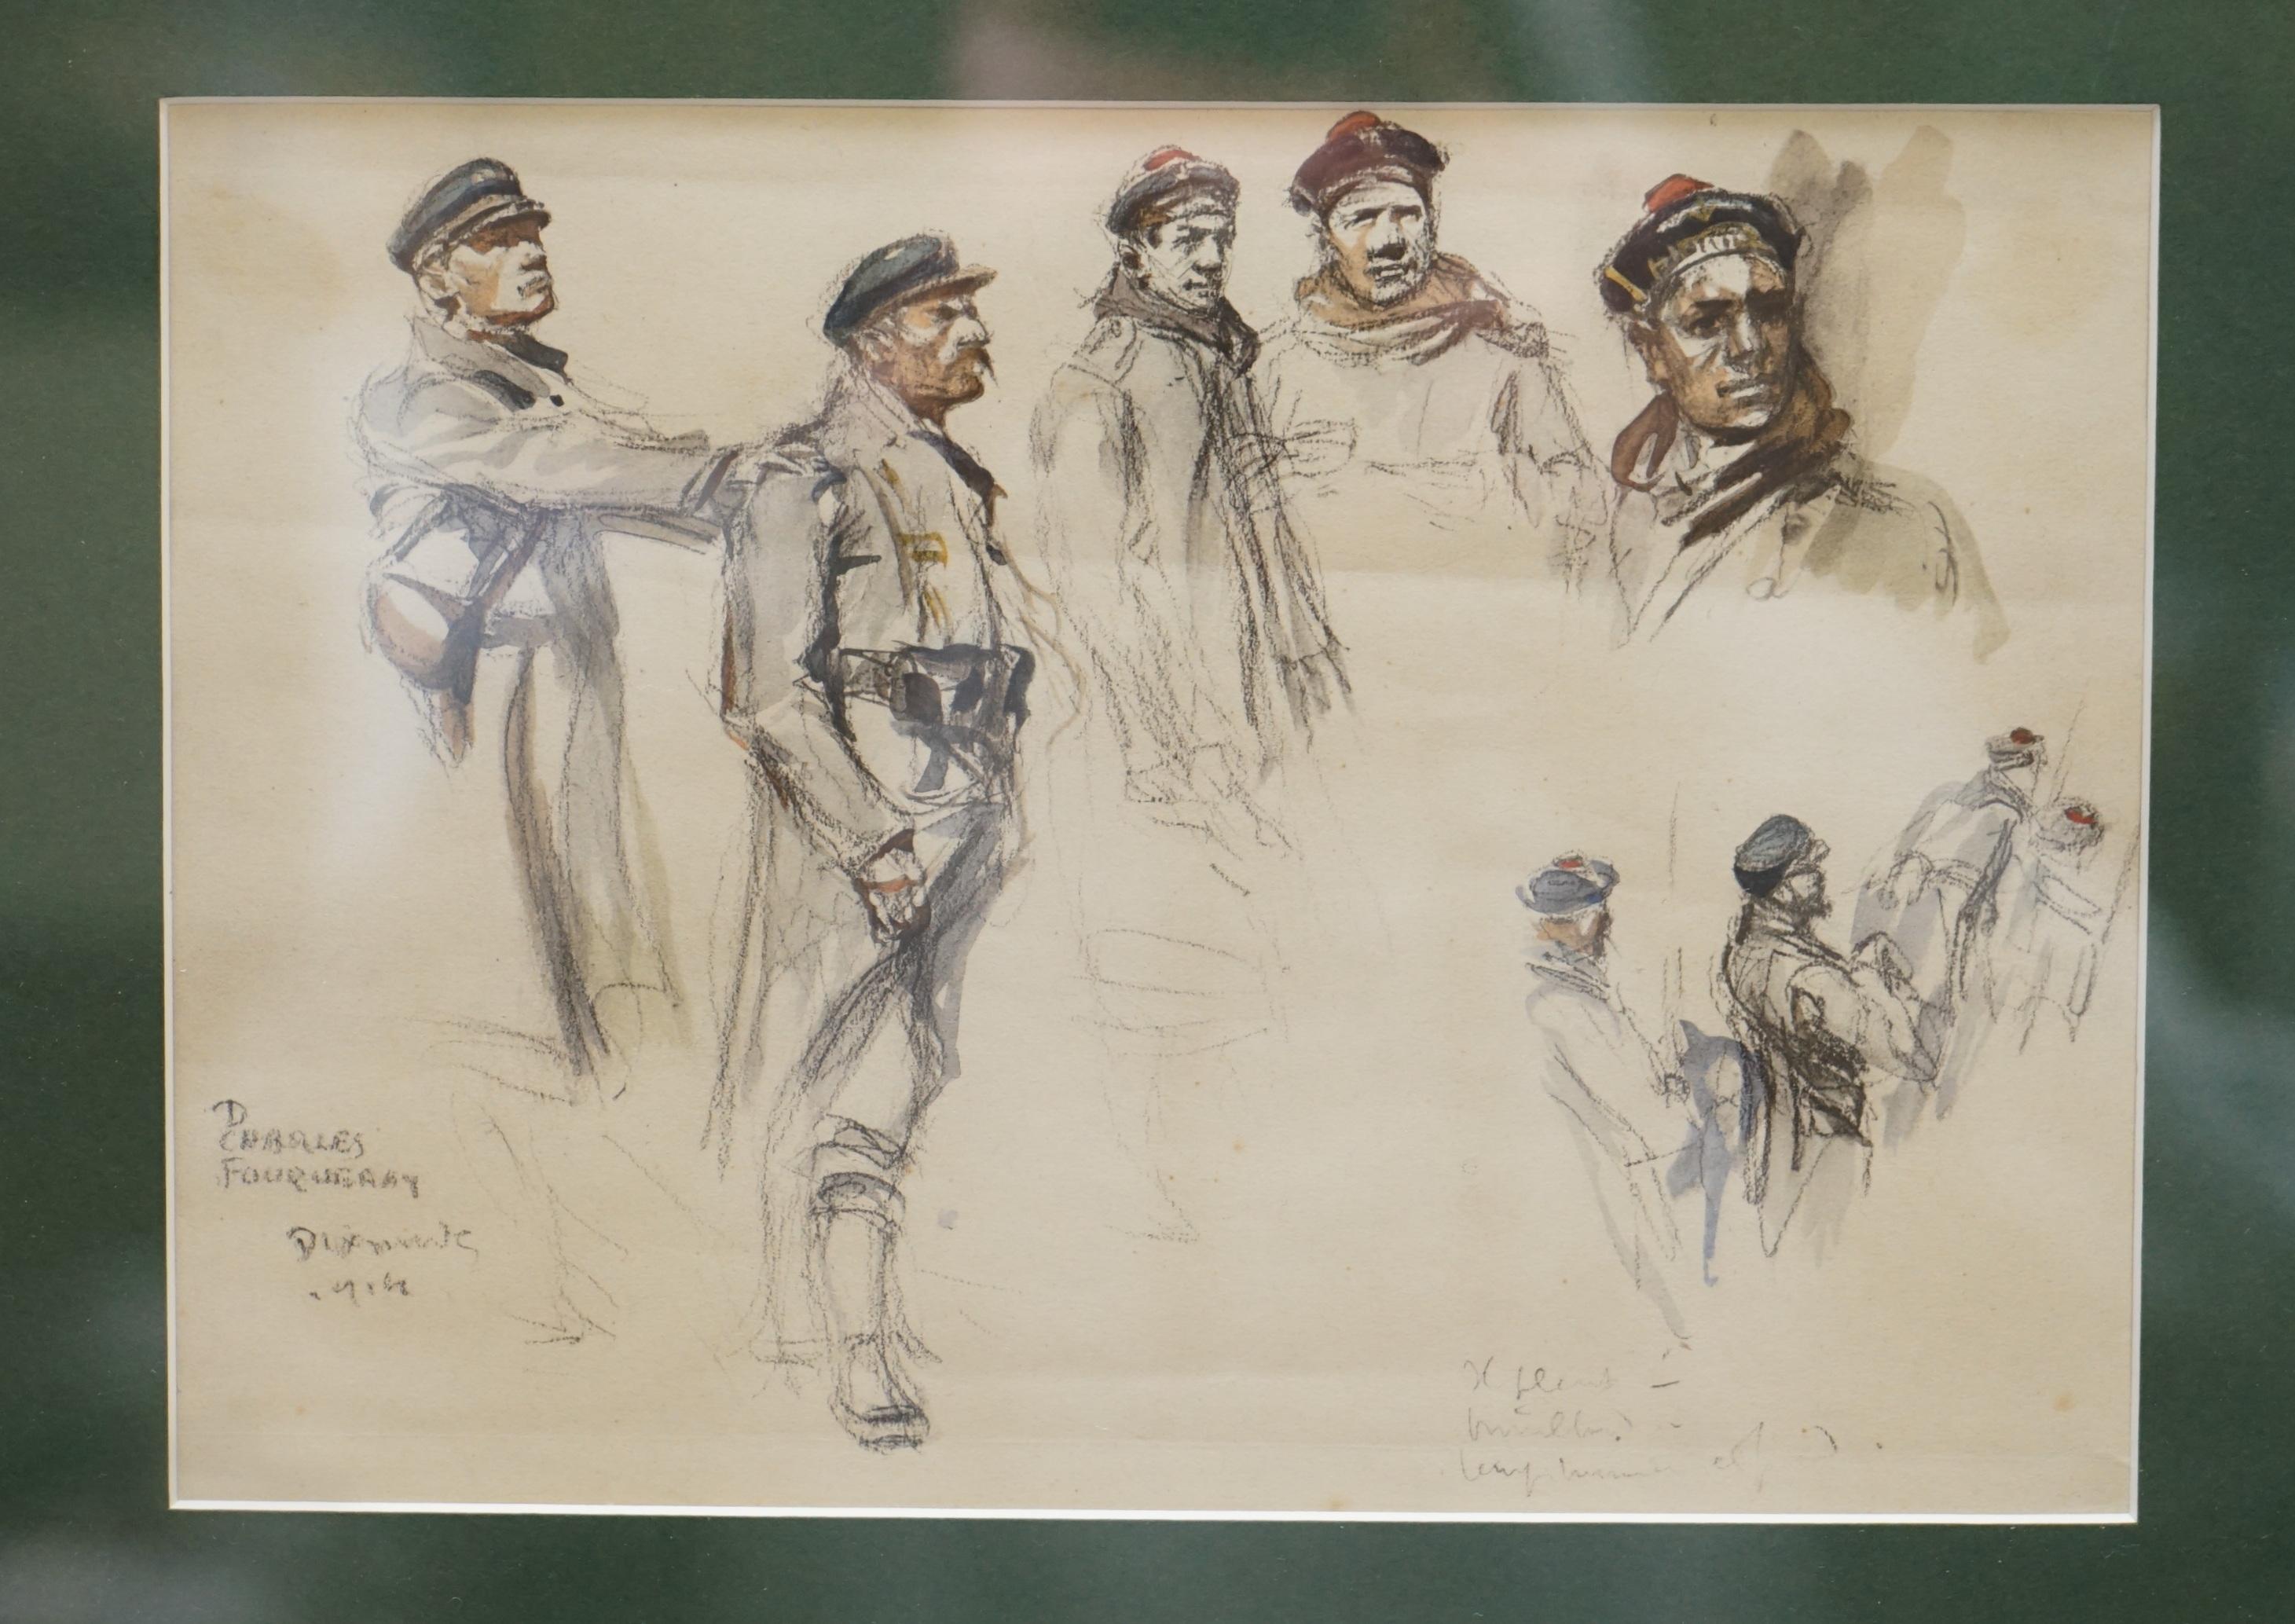 We are delighted to offer for sale this stunning suite of four, newly framed in Pollard Oak, Charles Dominique Fouquerary 1914 dated water colour sketches of WW1.

Charles Dominique Fouqueray (Le Mans, 23 April 1869 – 28 March 1956) was a French